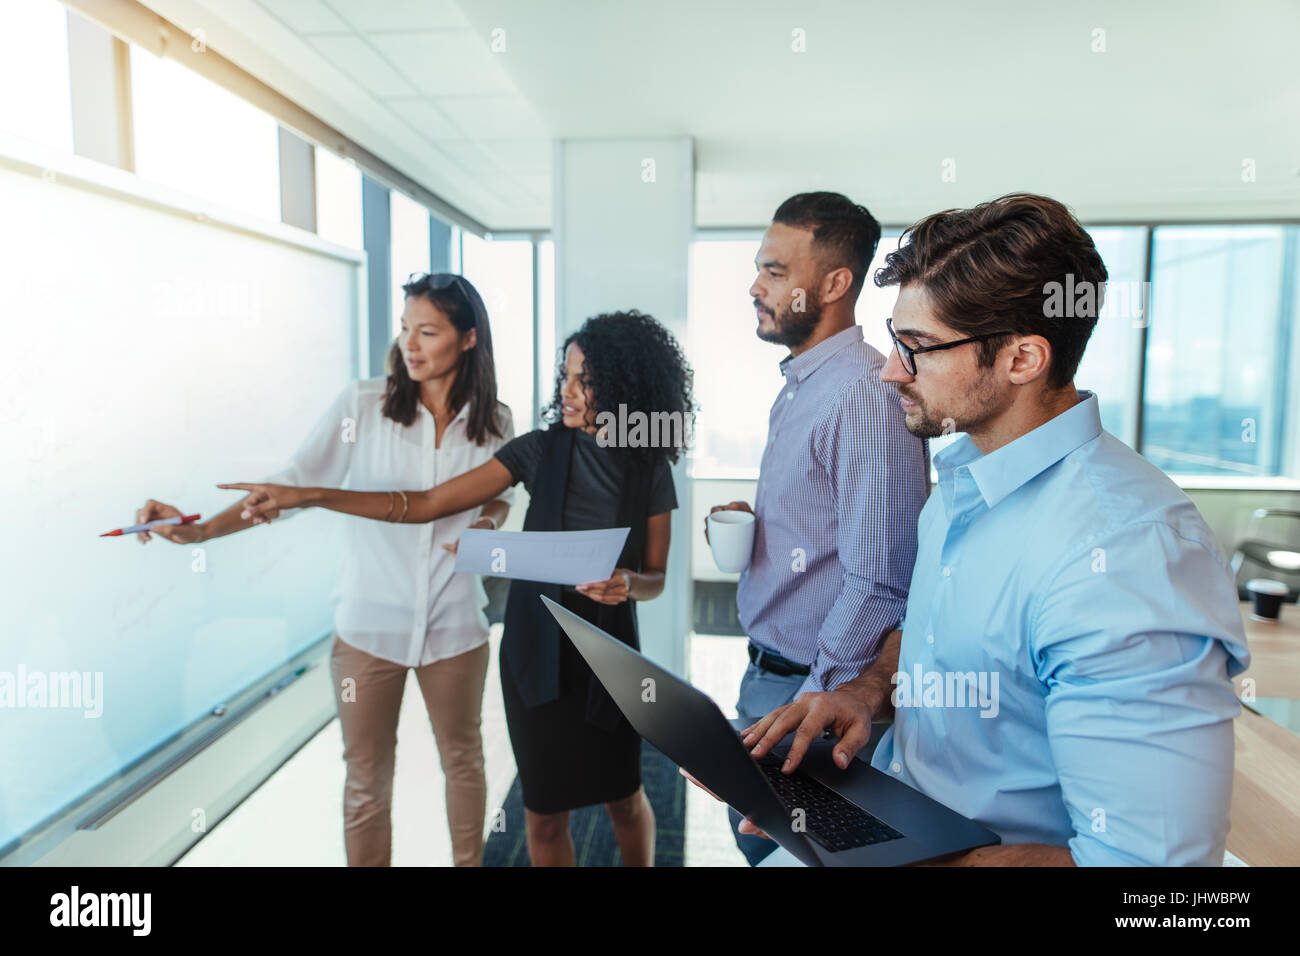 Women entrepreneurs discussing business ideas in boardroom with their colleagues. Young business investors presenting a business plan on a white board Stock Photo